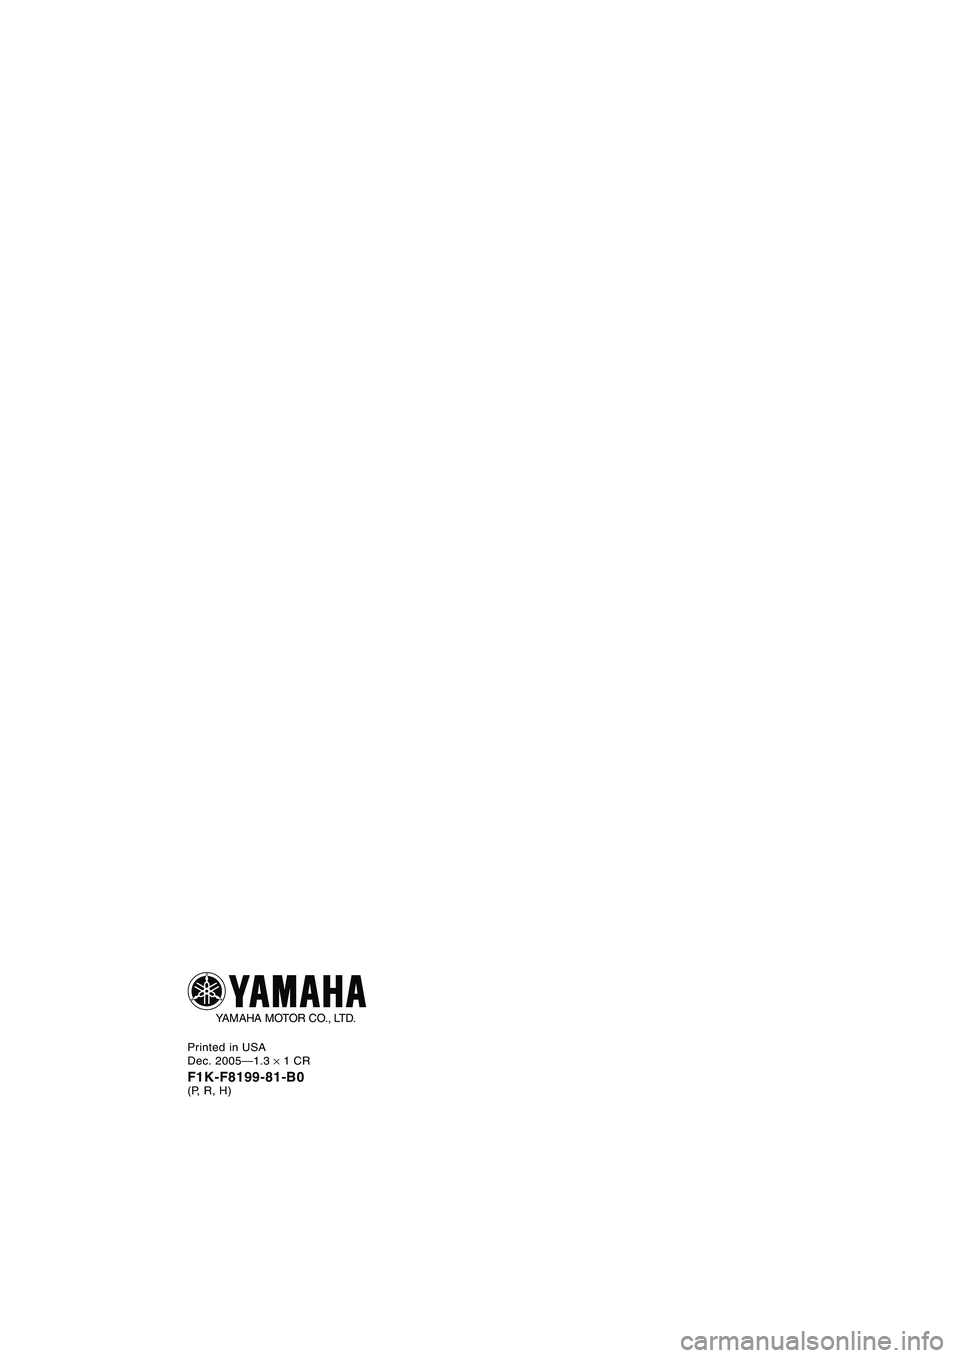 YAMAHA VX 2006  Manuale duso (in Italian) Printed in USA
Dec. 2005—1.3 × 1 CR
F1K-F8199-81-B0(P, R, H)
YAMAHA MOTOR CO., LTD.
B_F1K80.book  Page 1  Monday, October 24, 2005  2:31 PM 